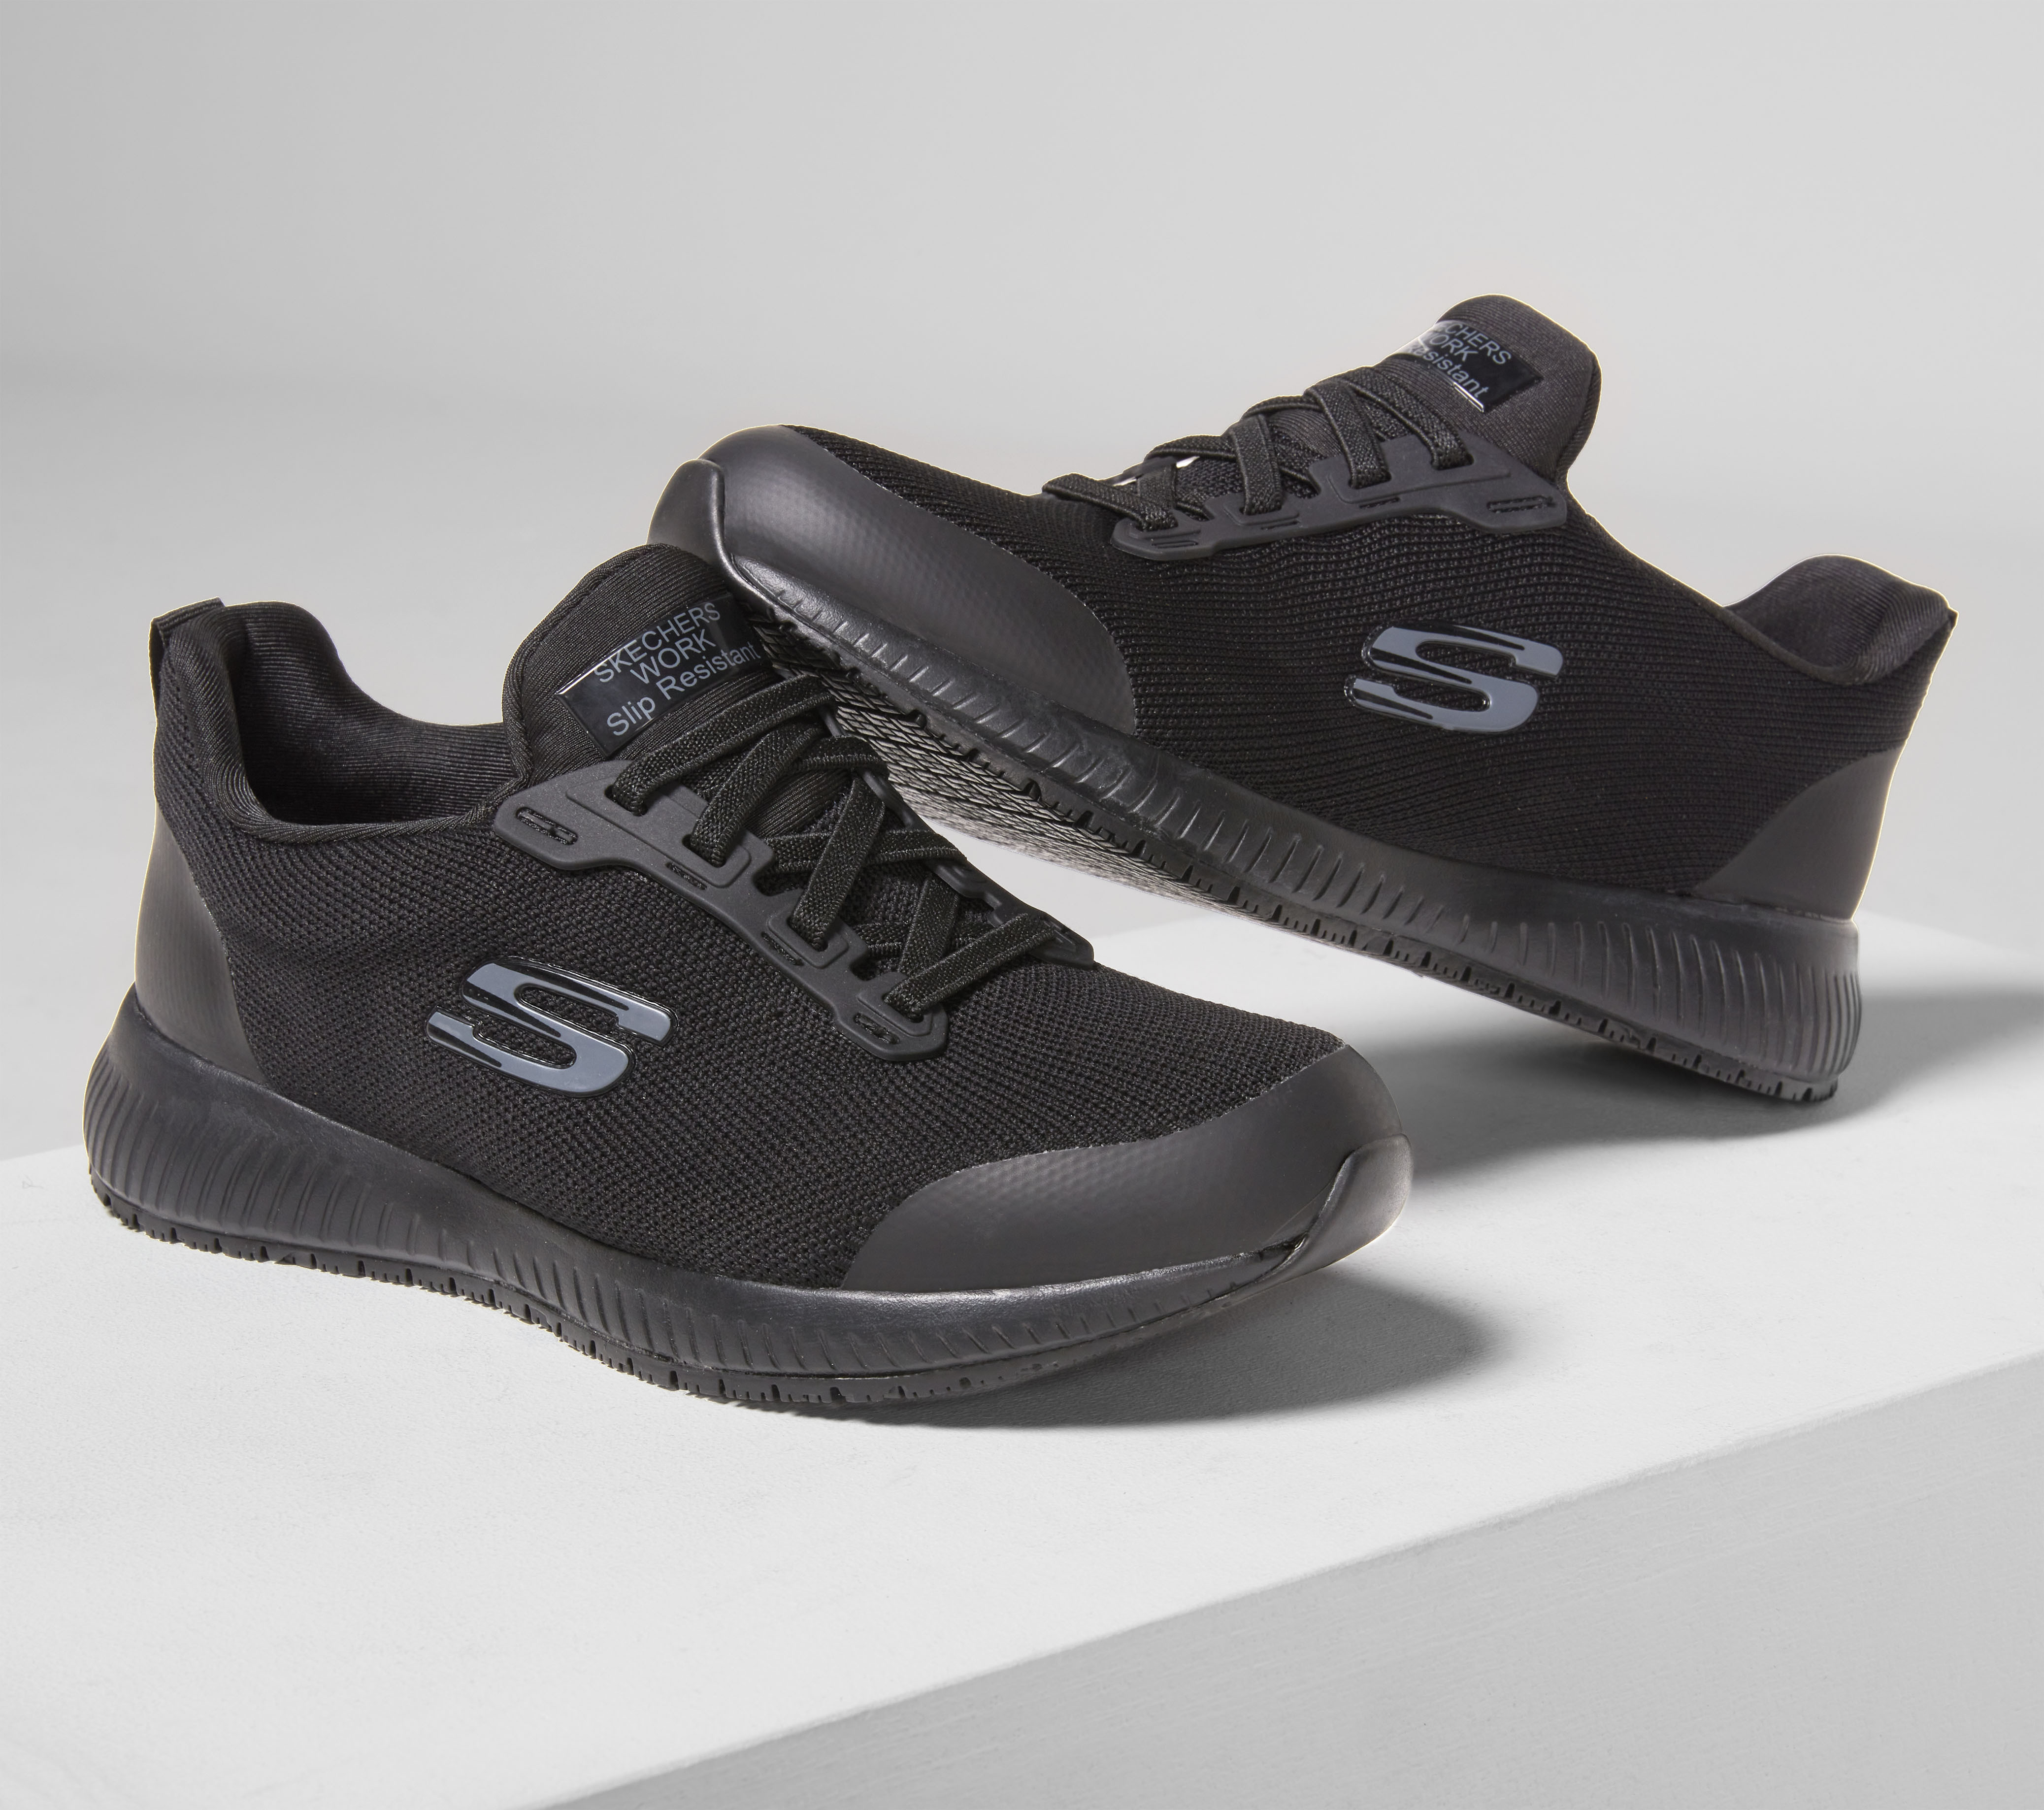 Safety Trainers & Boots : Sketchers Slip Resistant Squad